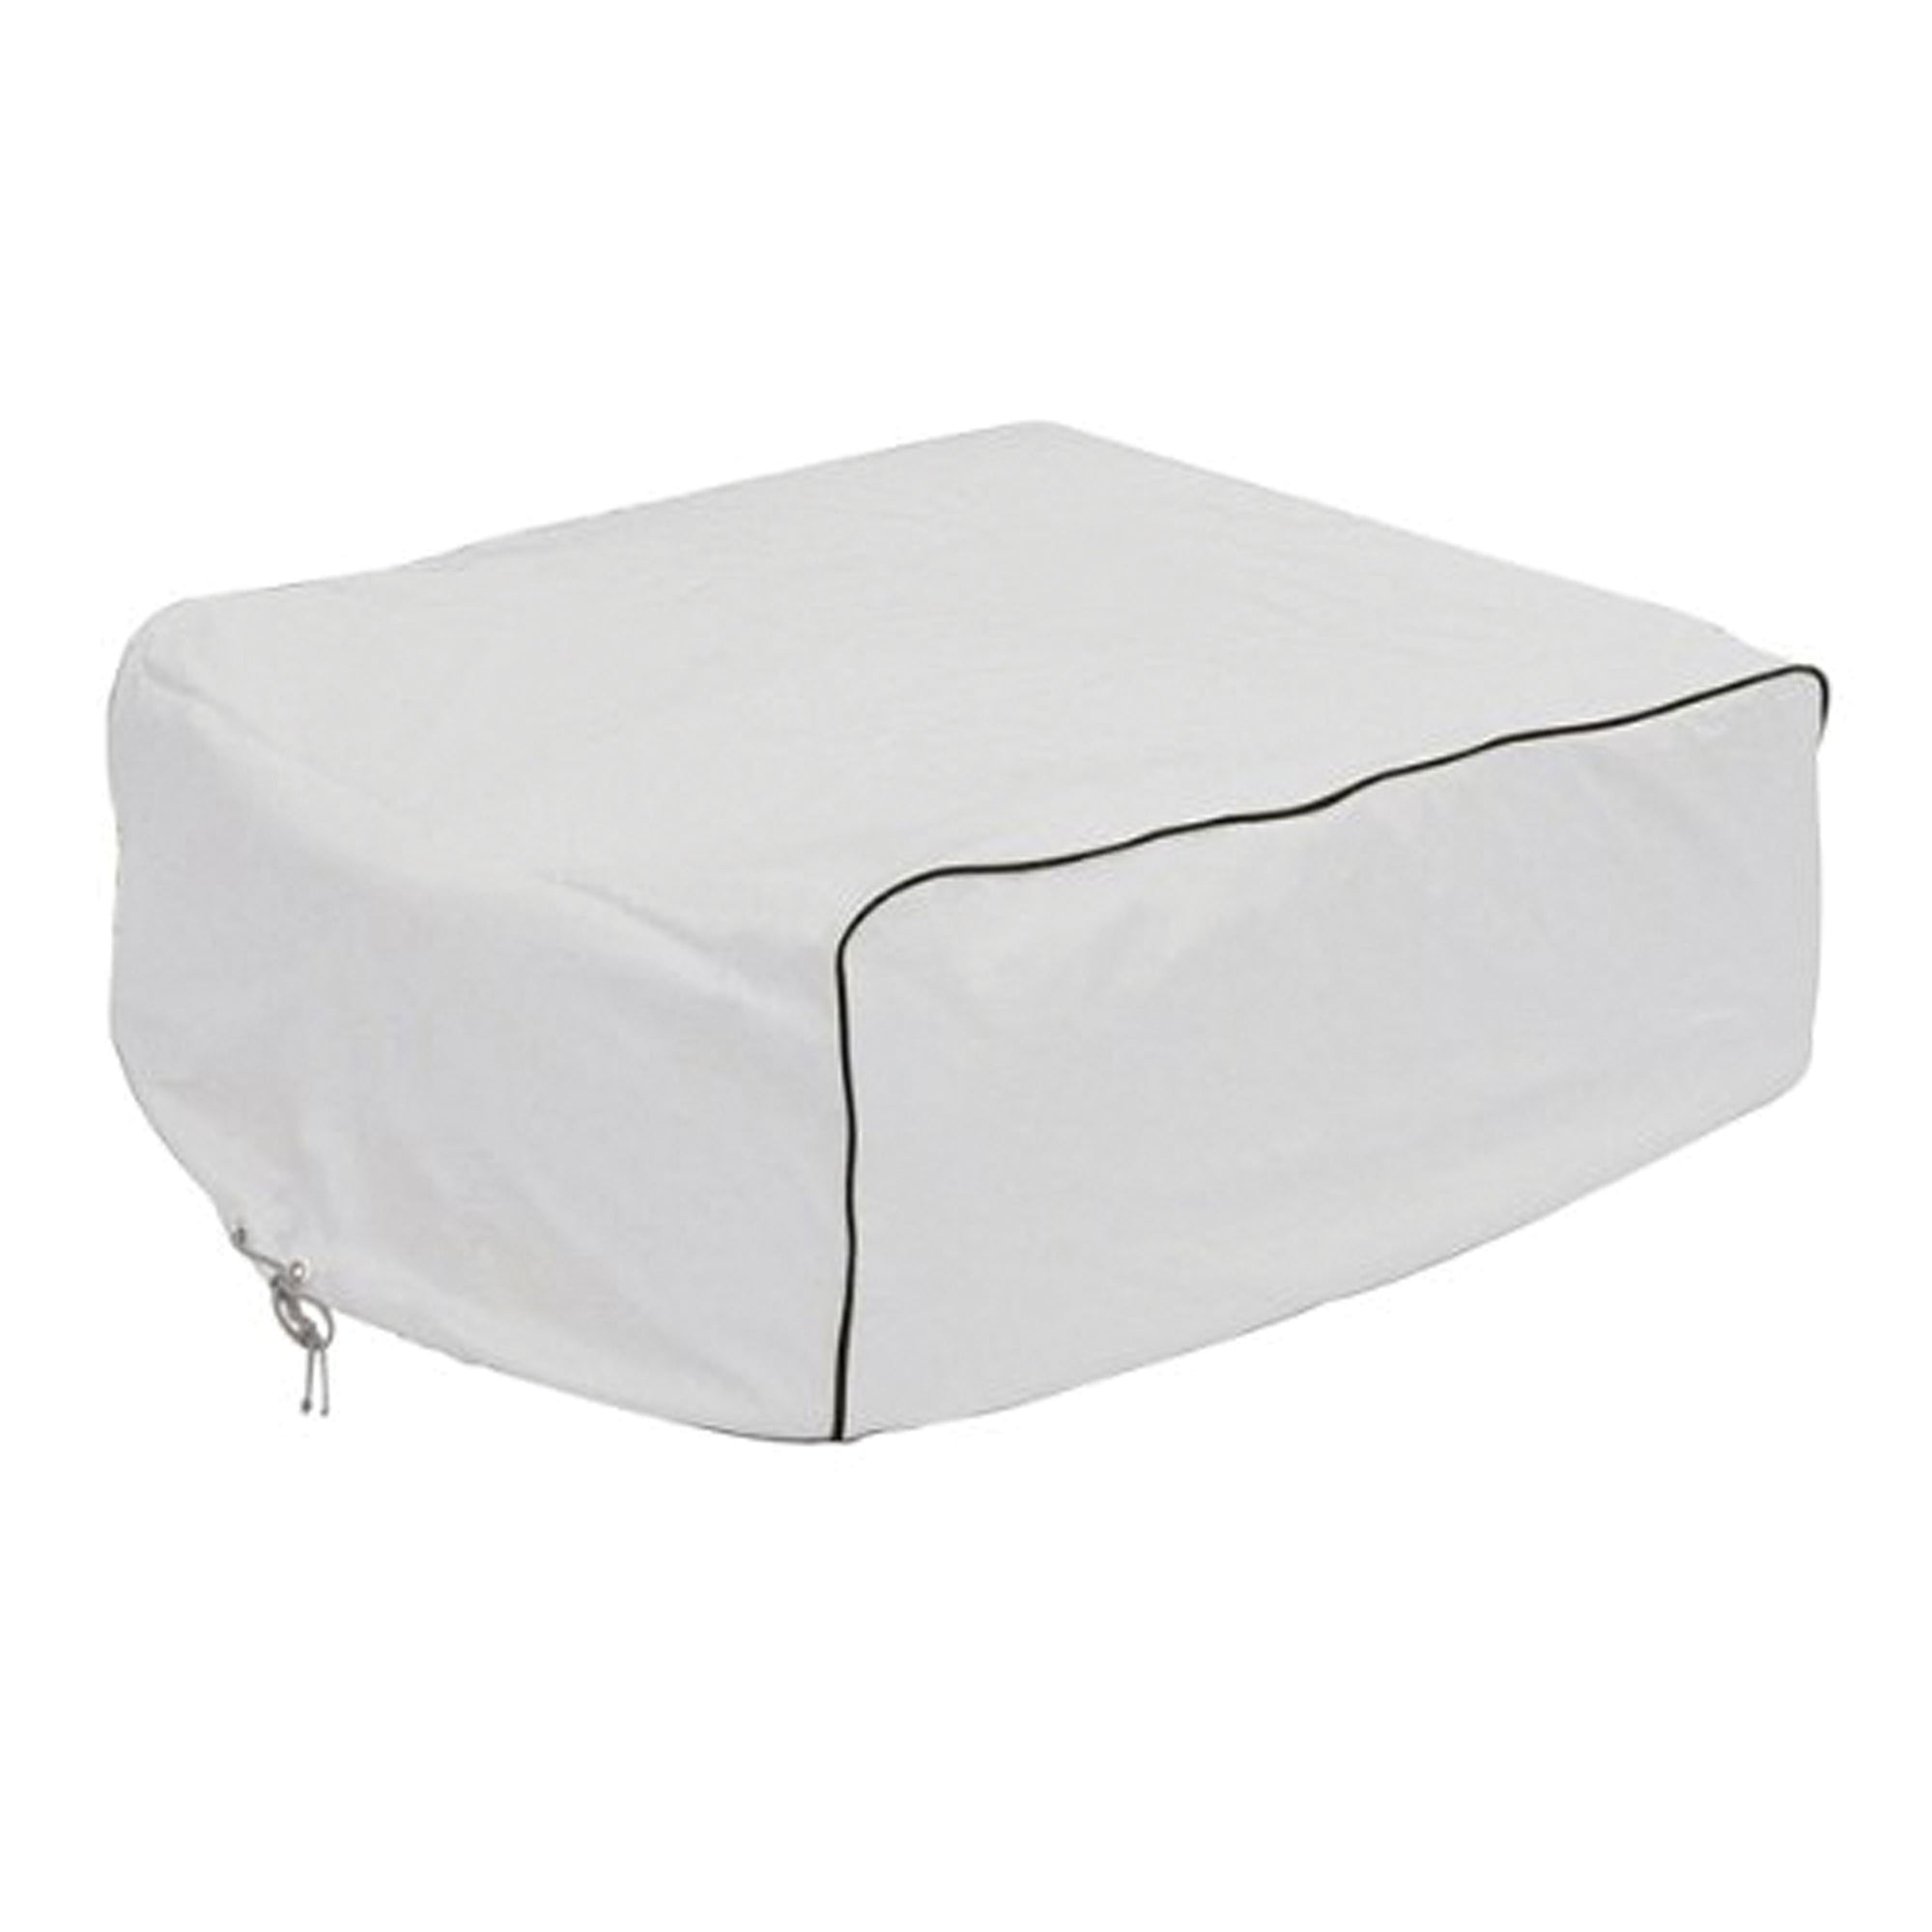 Classic Accessories 77420 RV Air Conditioner Cover - Duo-therm, Snow White